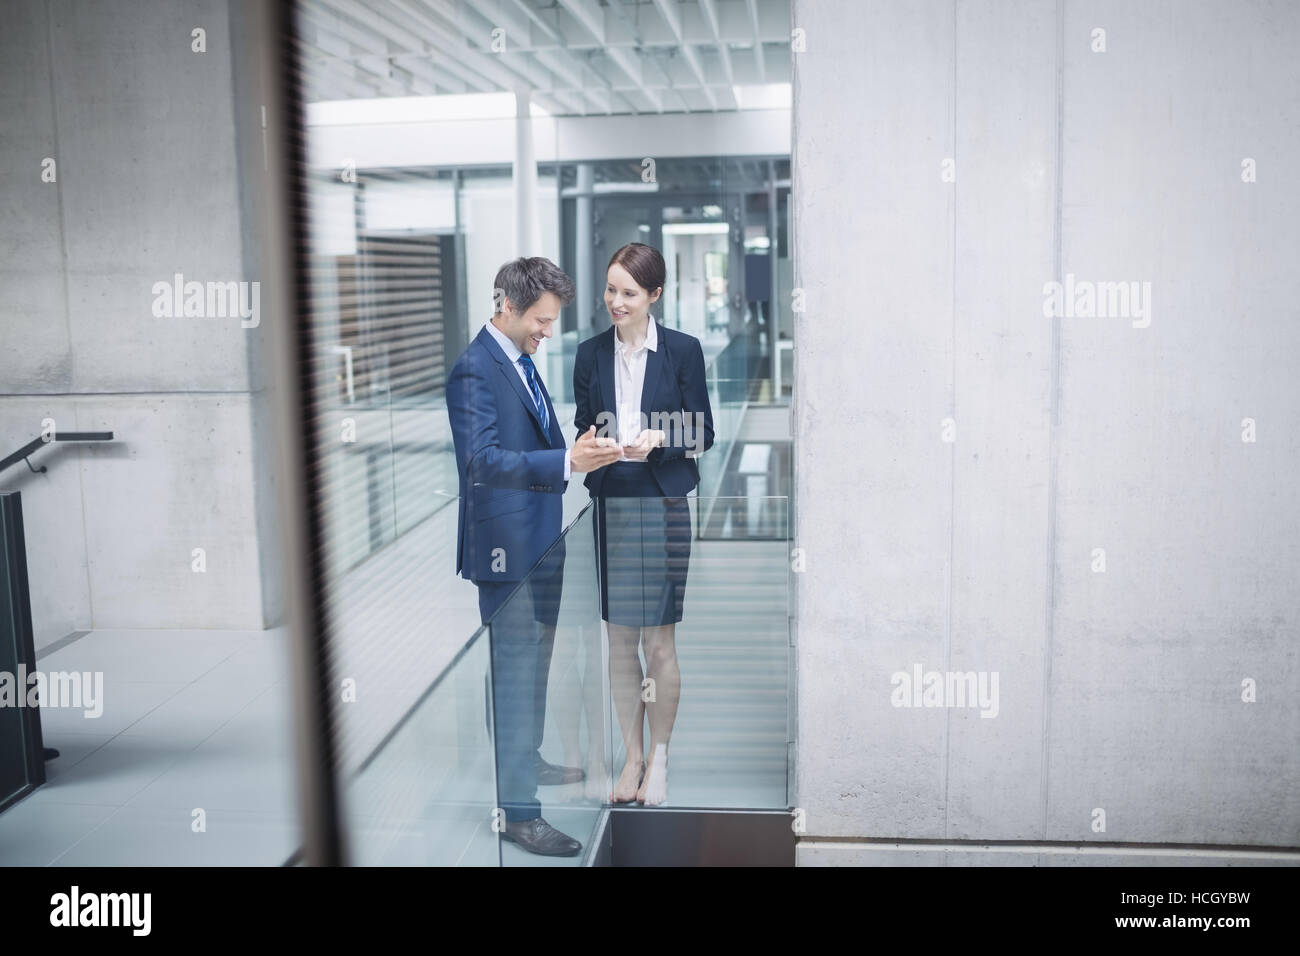 Businessman and colleague discussing over digital tablet Stock Photo